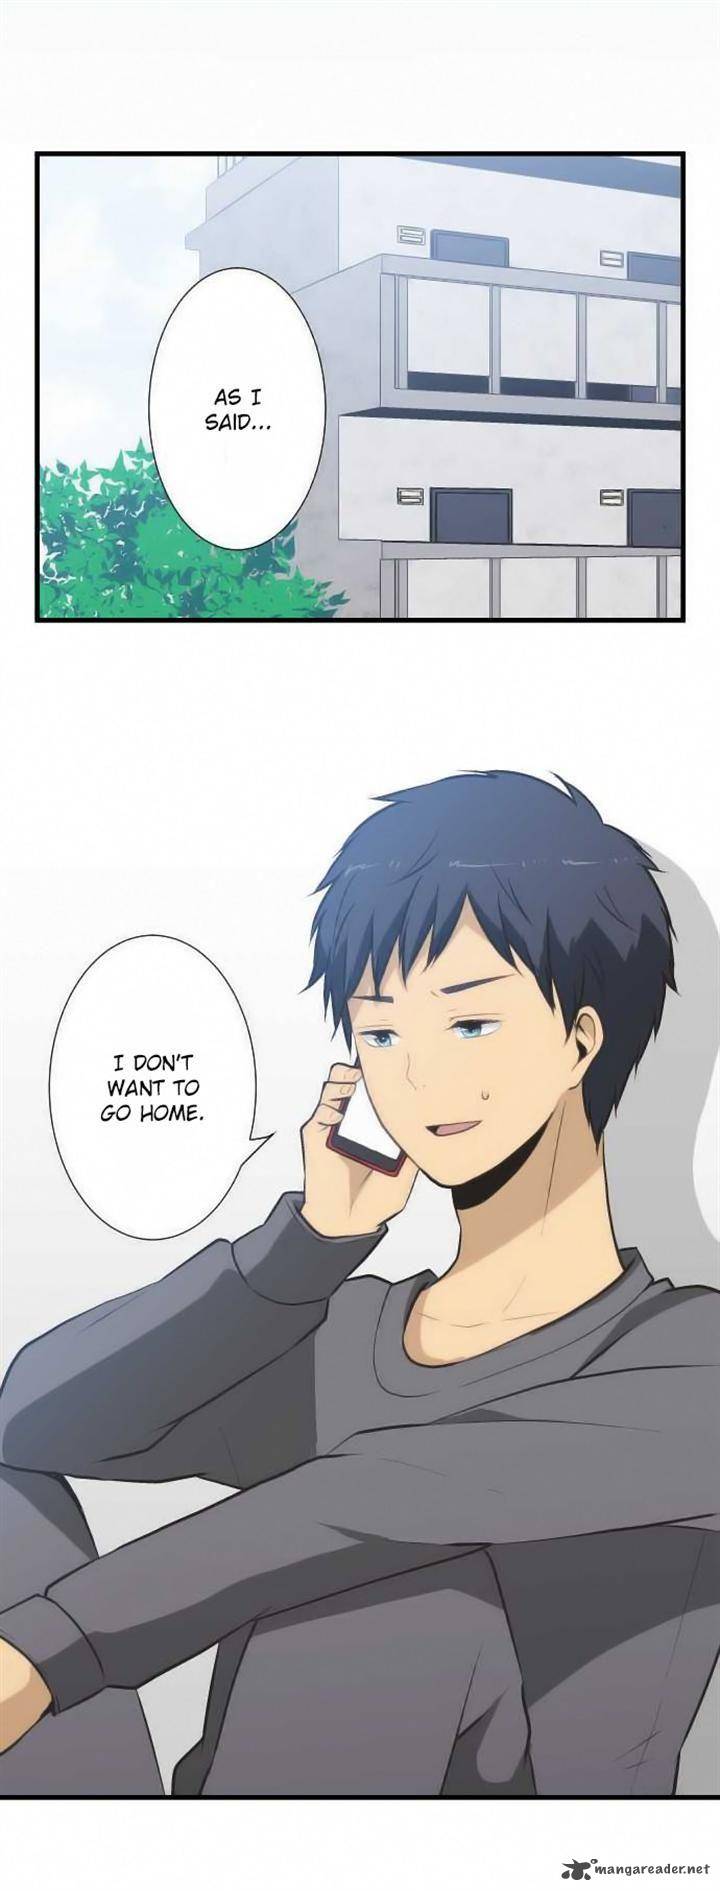 Relife 45 9